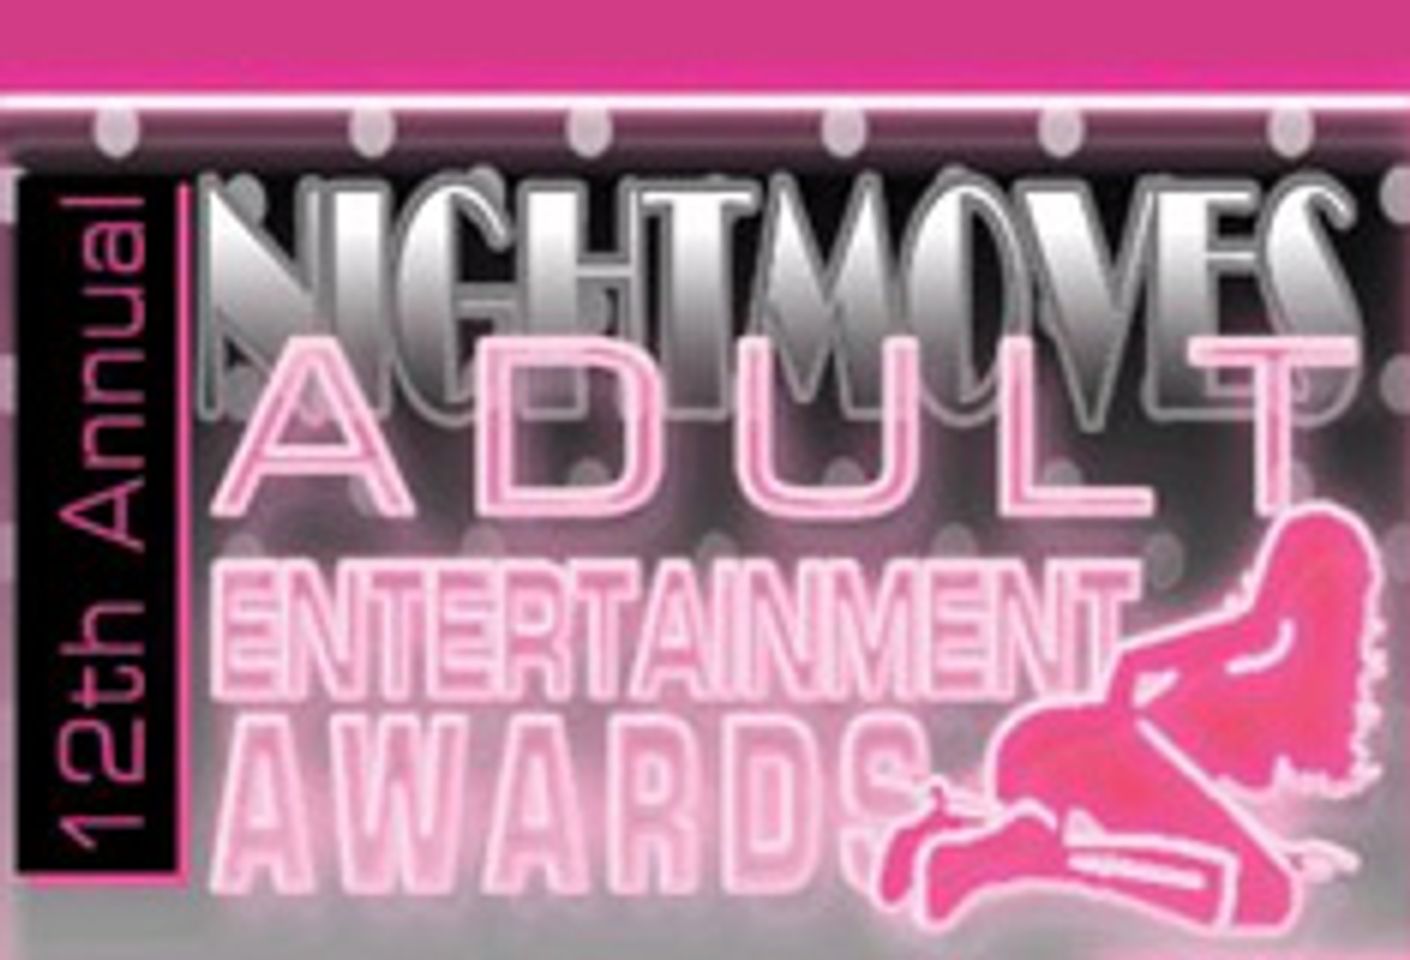 Winners of the Nightmoves Entertainment Awards Announced